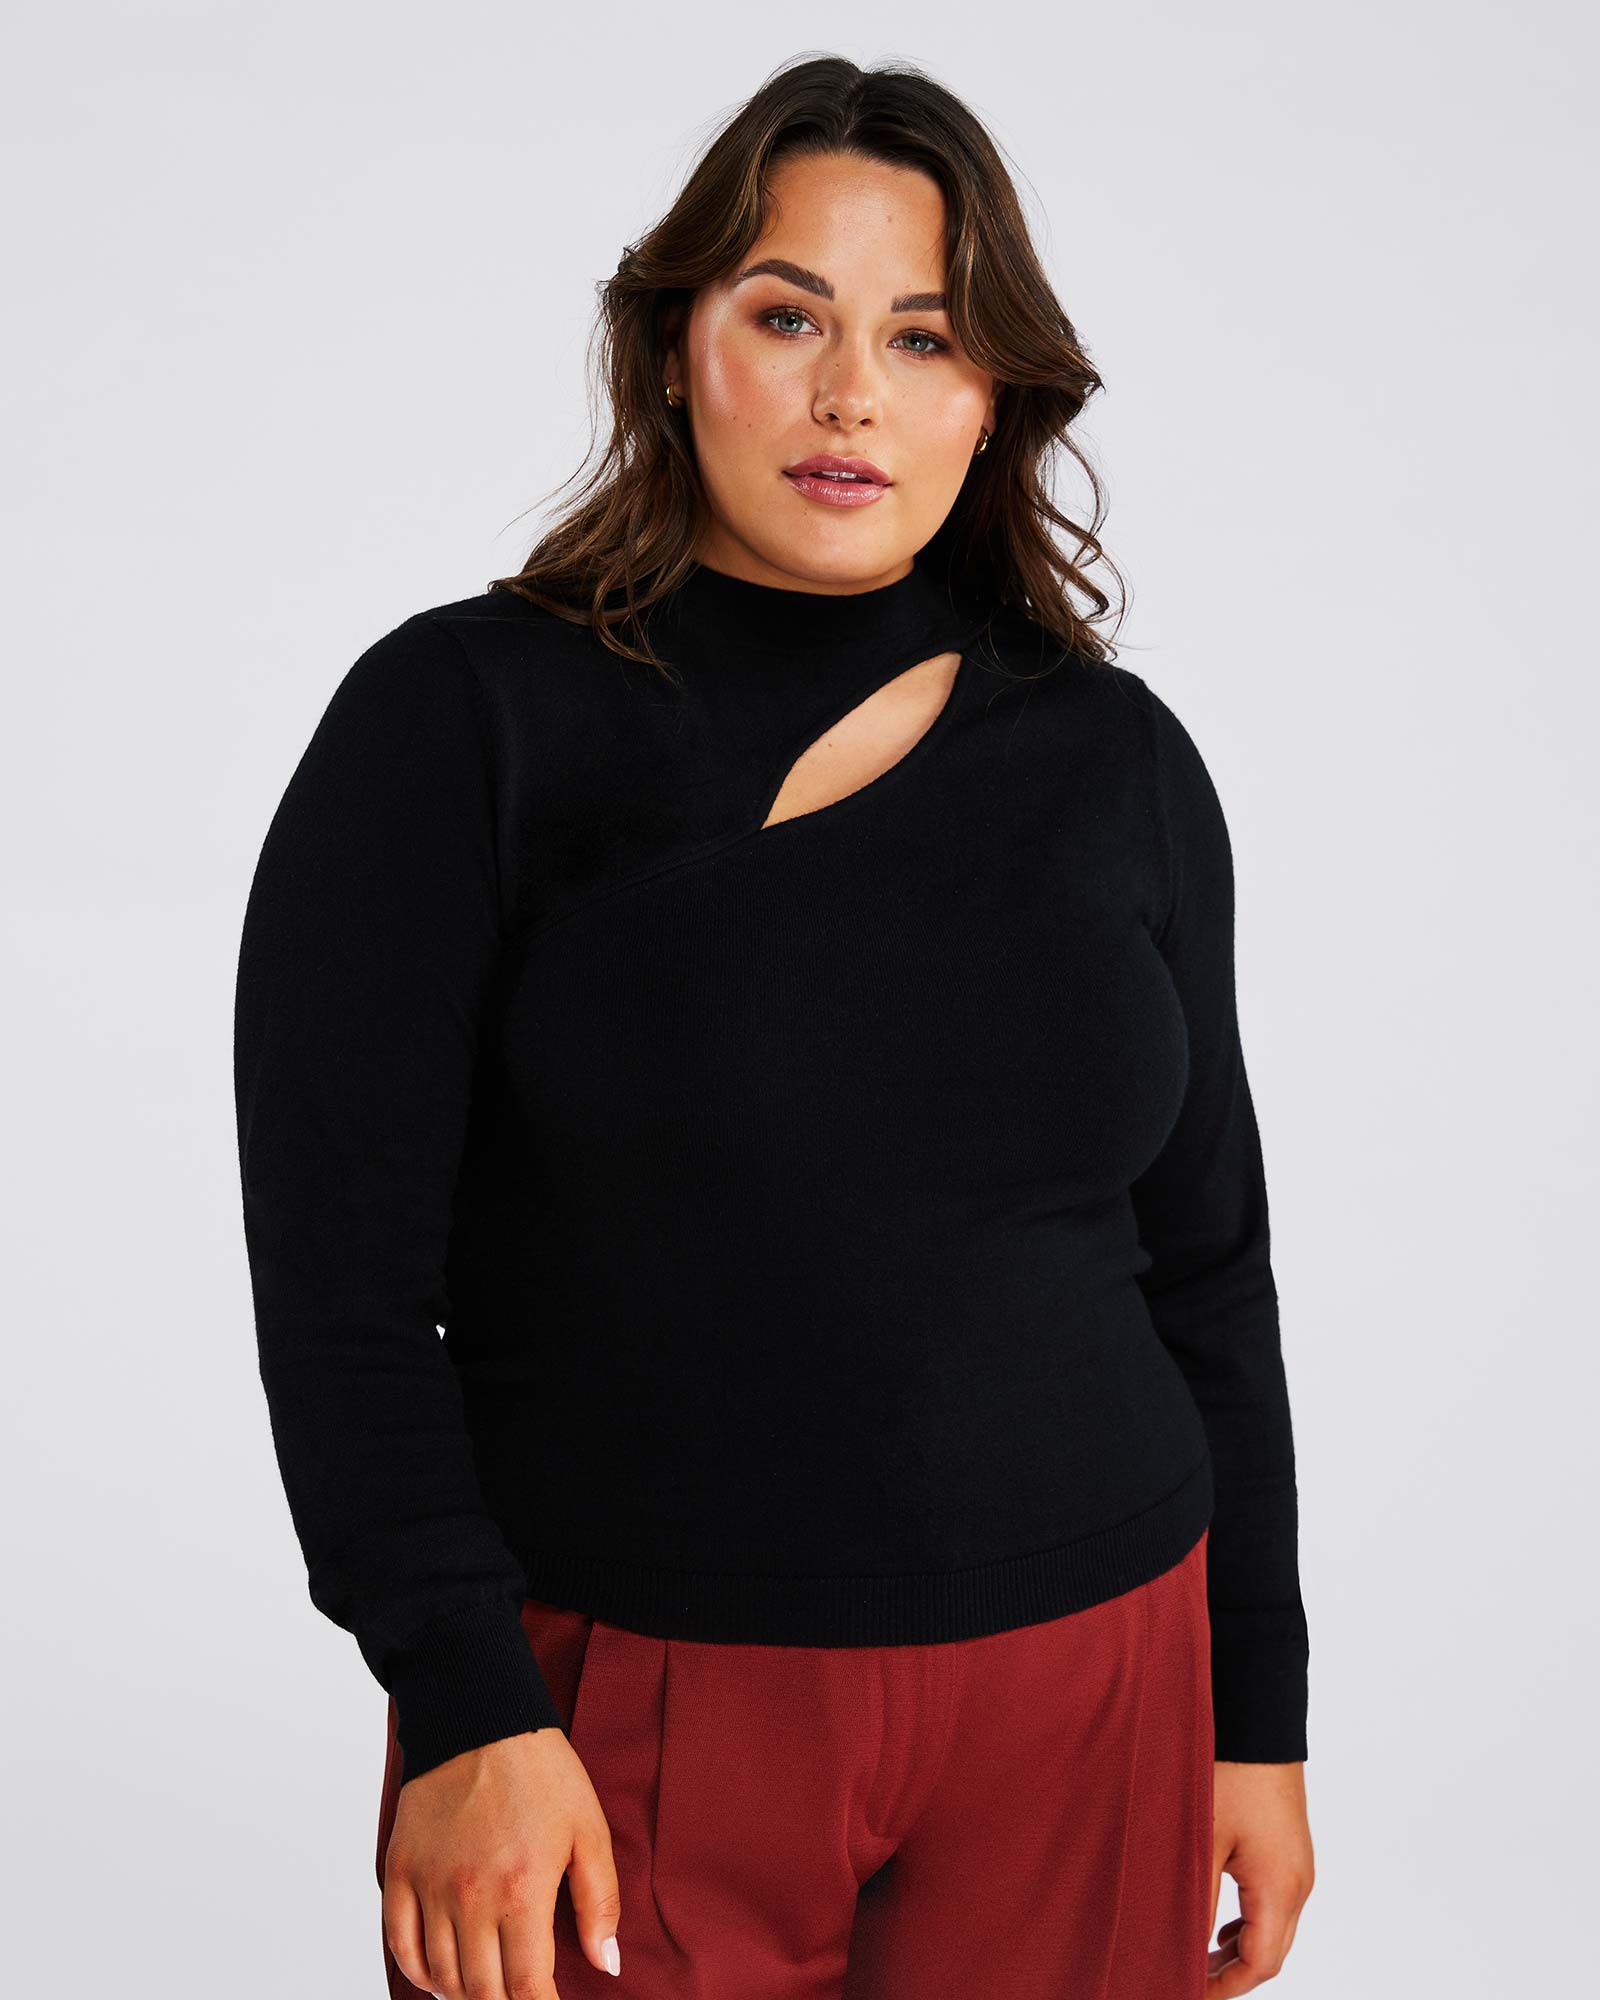 A plus-size woman with a high fashion quotient sporting a Black Cut Out Crewneck Sweater and red pants.